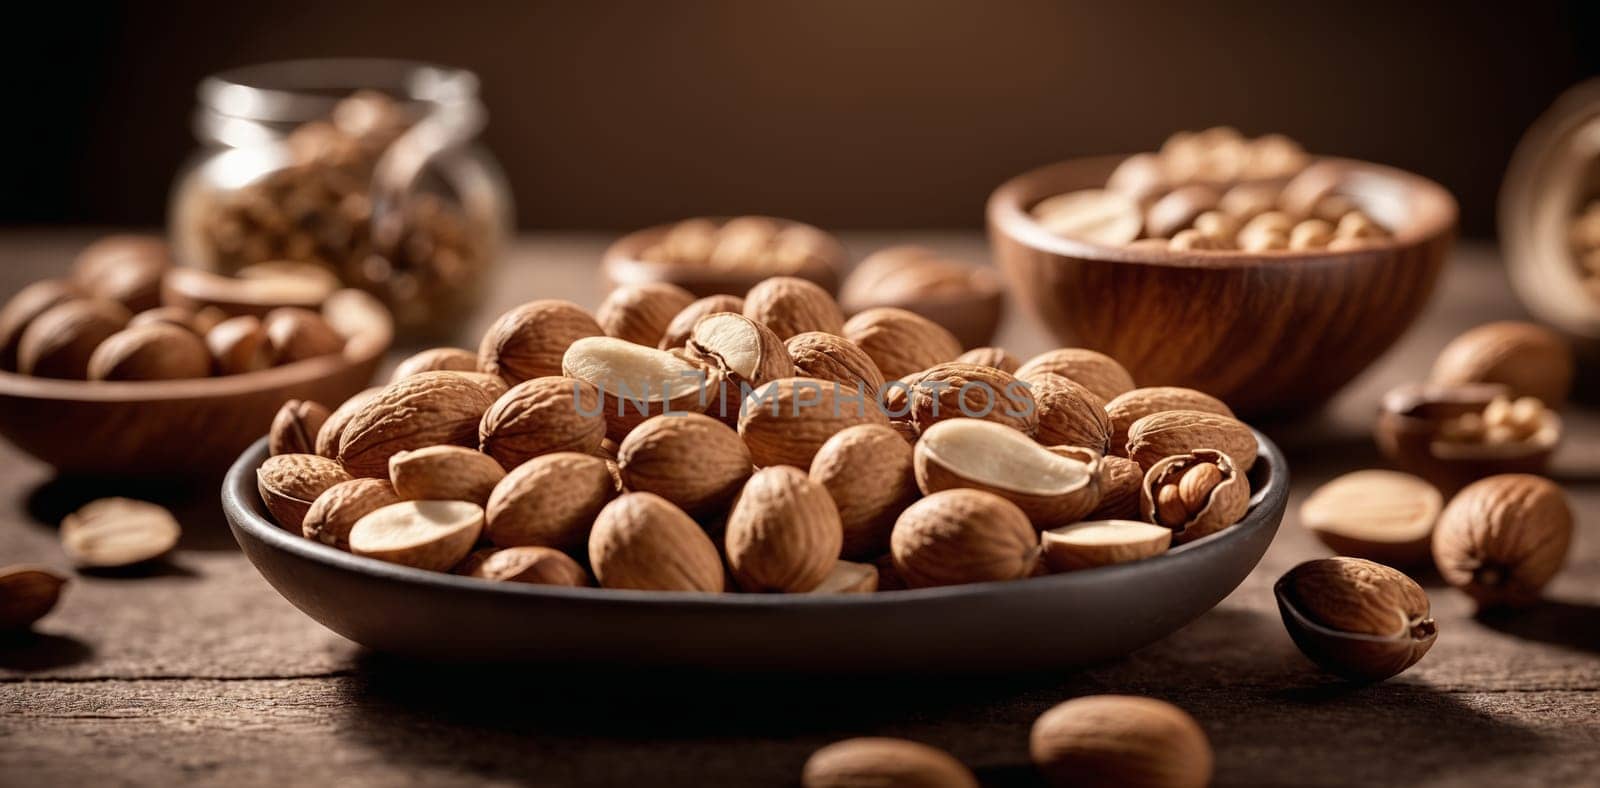 Almonds showcasing nutritional benefits, perfect for health-related themes.